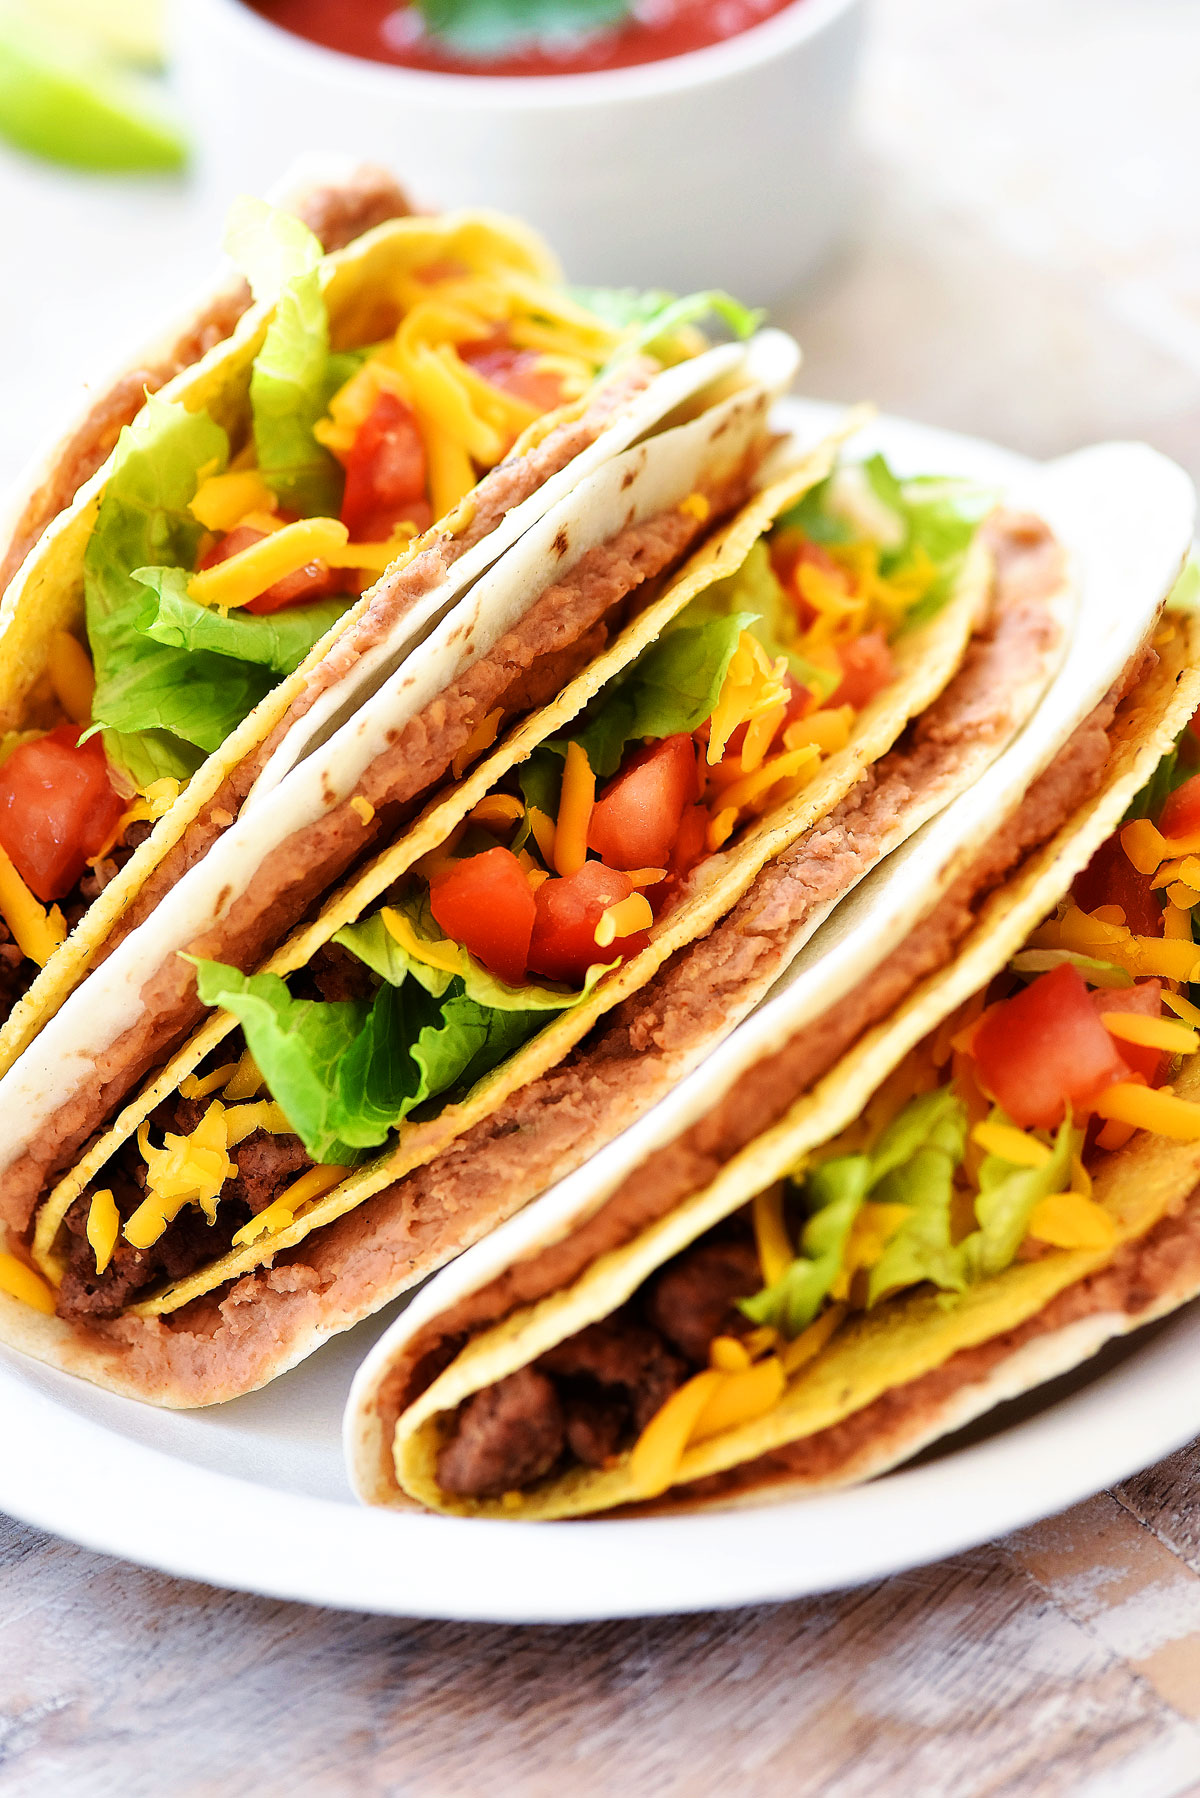 Double Decker Tacos start with a flour tortilla layered with beans, then inside there's a crispy beef taco filled with all your favorite taco toppings. Life-in-the-Lofthouse.com